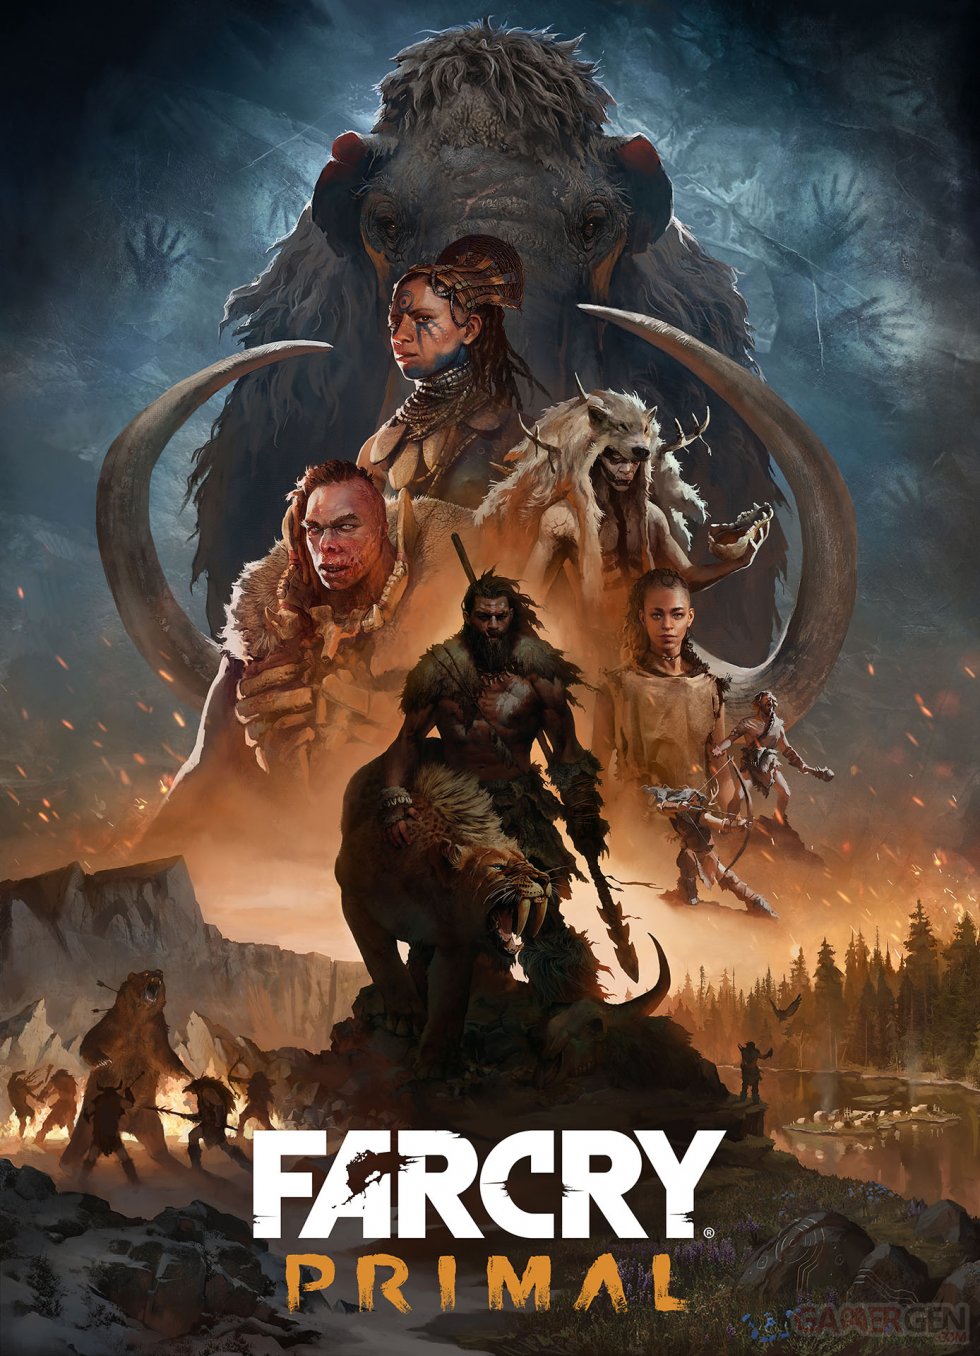 1453842951-fcp-hirez-casting-characters-preview-far cry primal